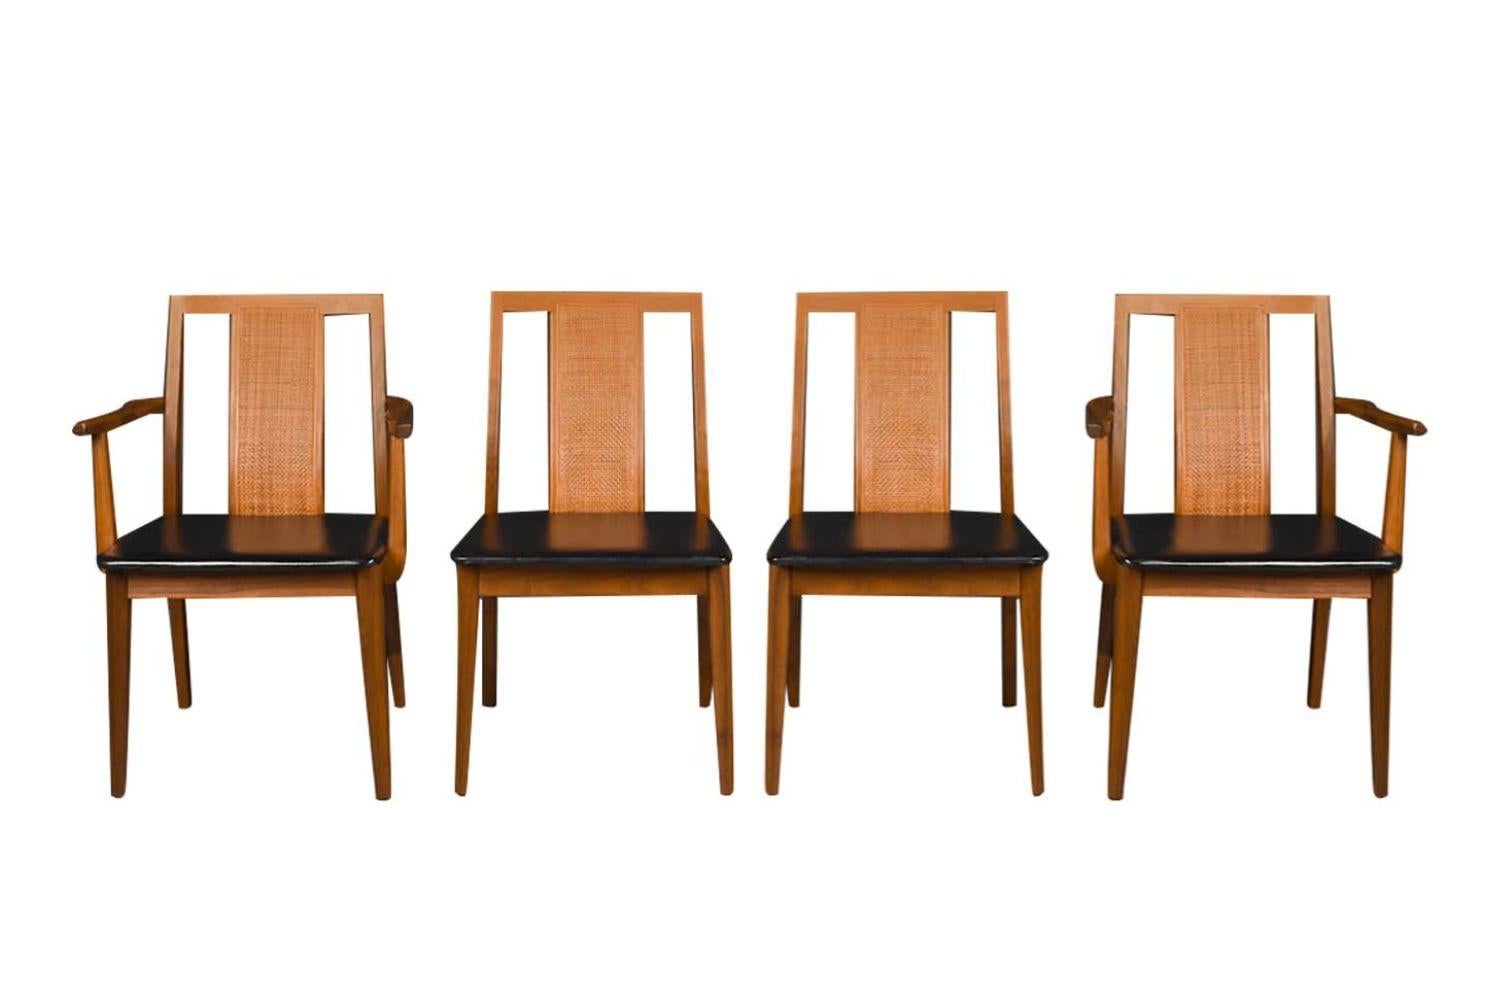 A beautiful set of four mid century modern chairs two arm chairs and two side chairs, in the style of Edward Wormley. This set features solid walnut frames with black faux leather seats. A classic minimalistic design with a sleek angled backrest